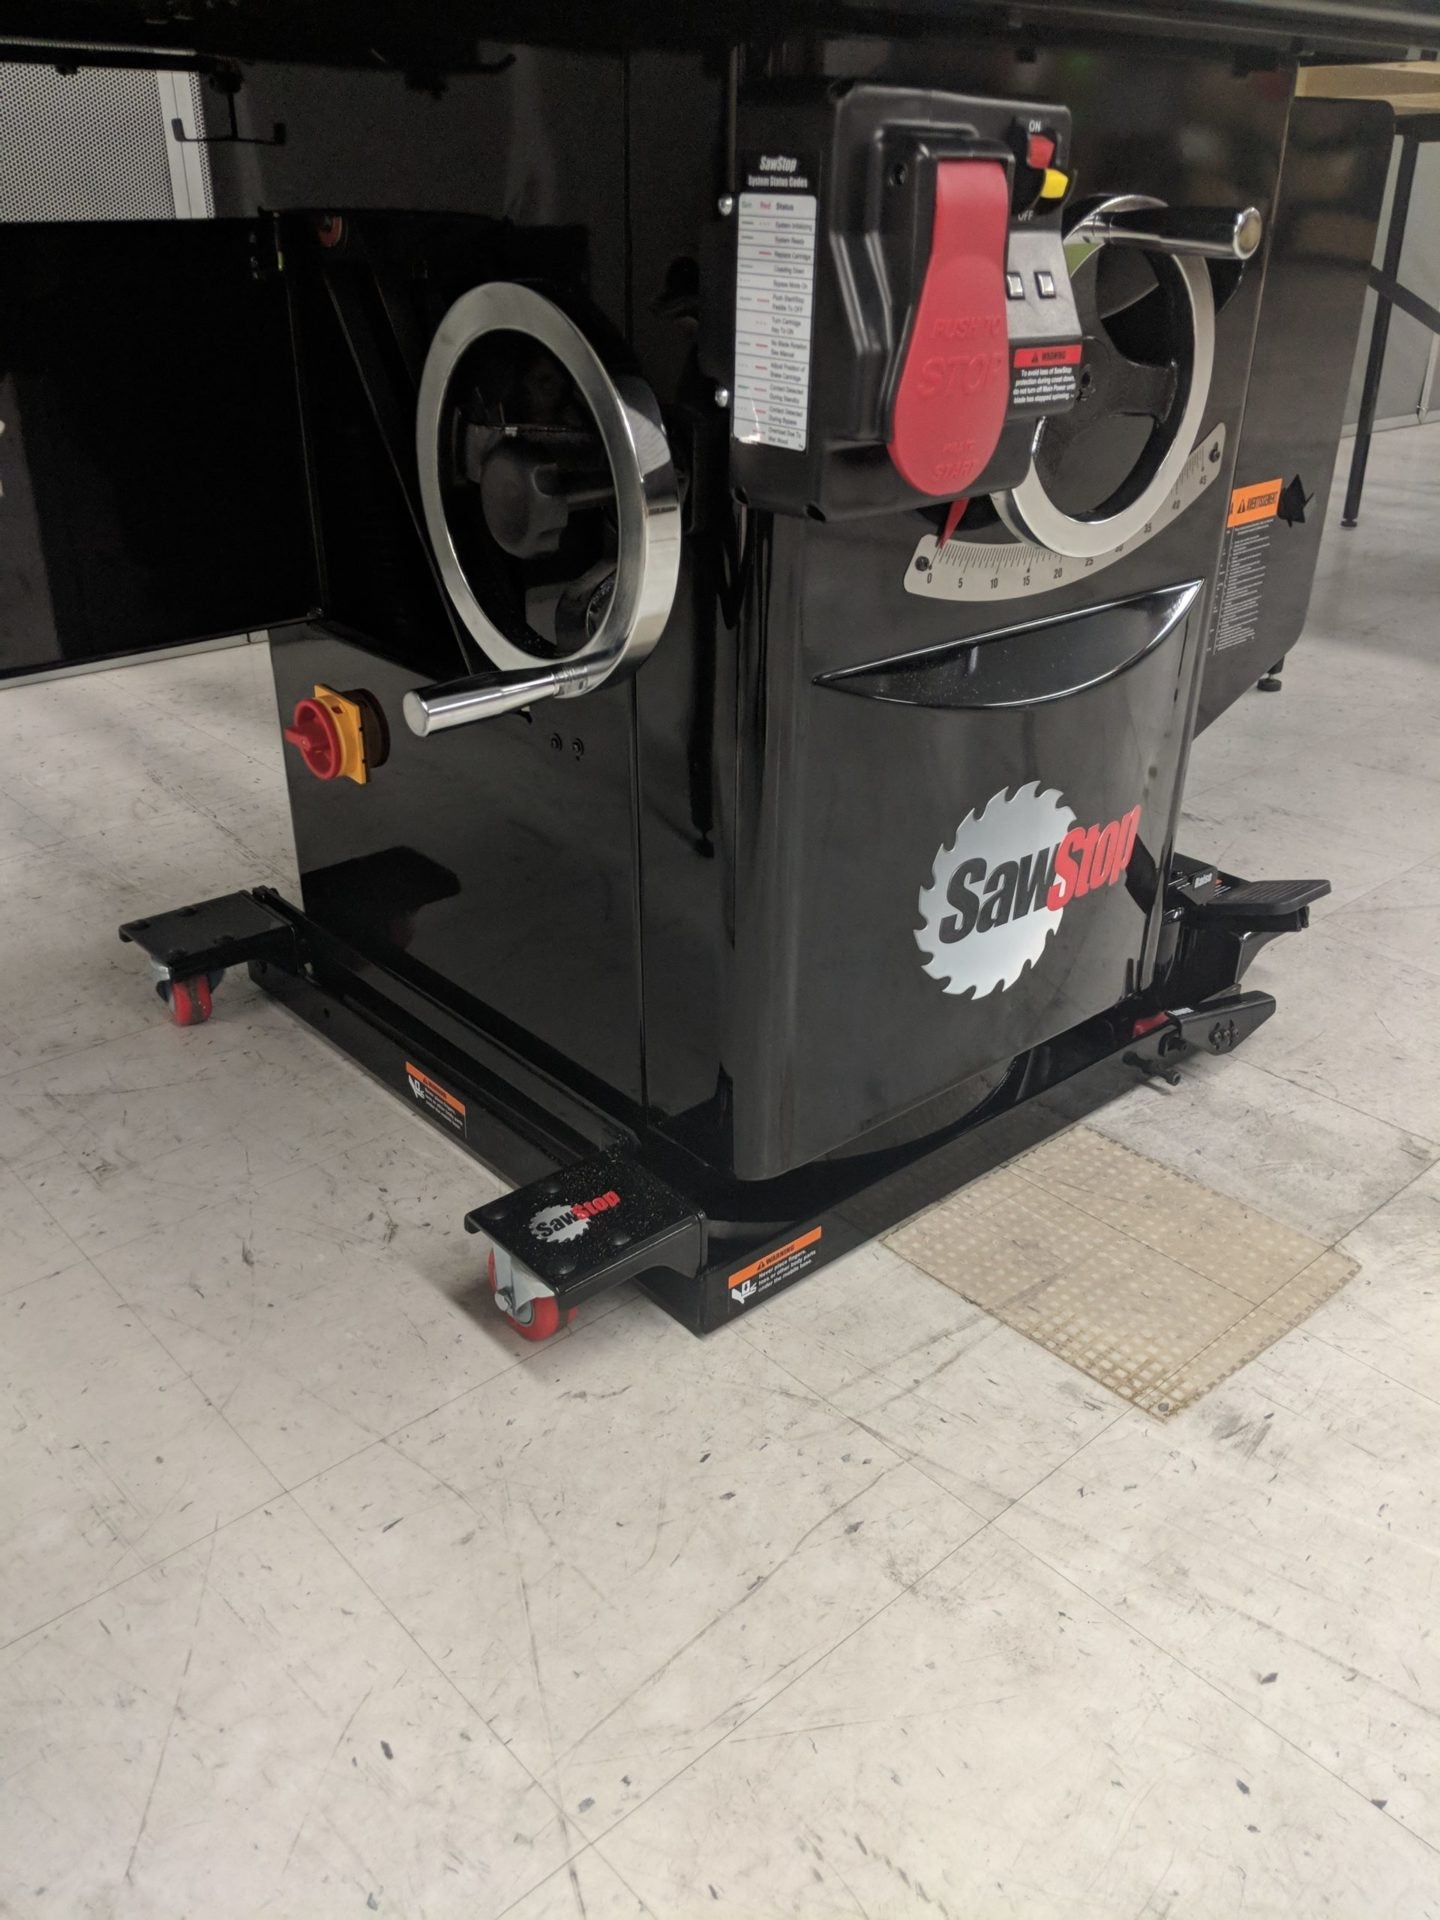 Sawstop Industrial Saw Mobile Base MB-IND-000 Power Tool Services